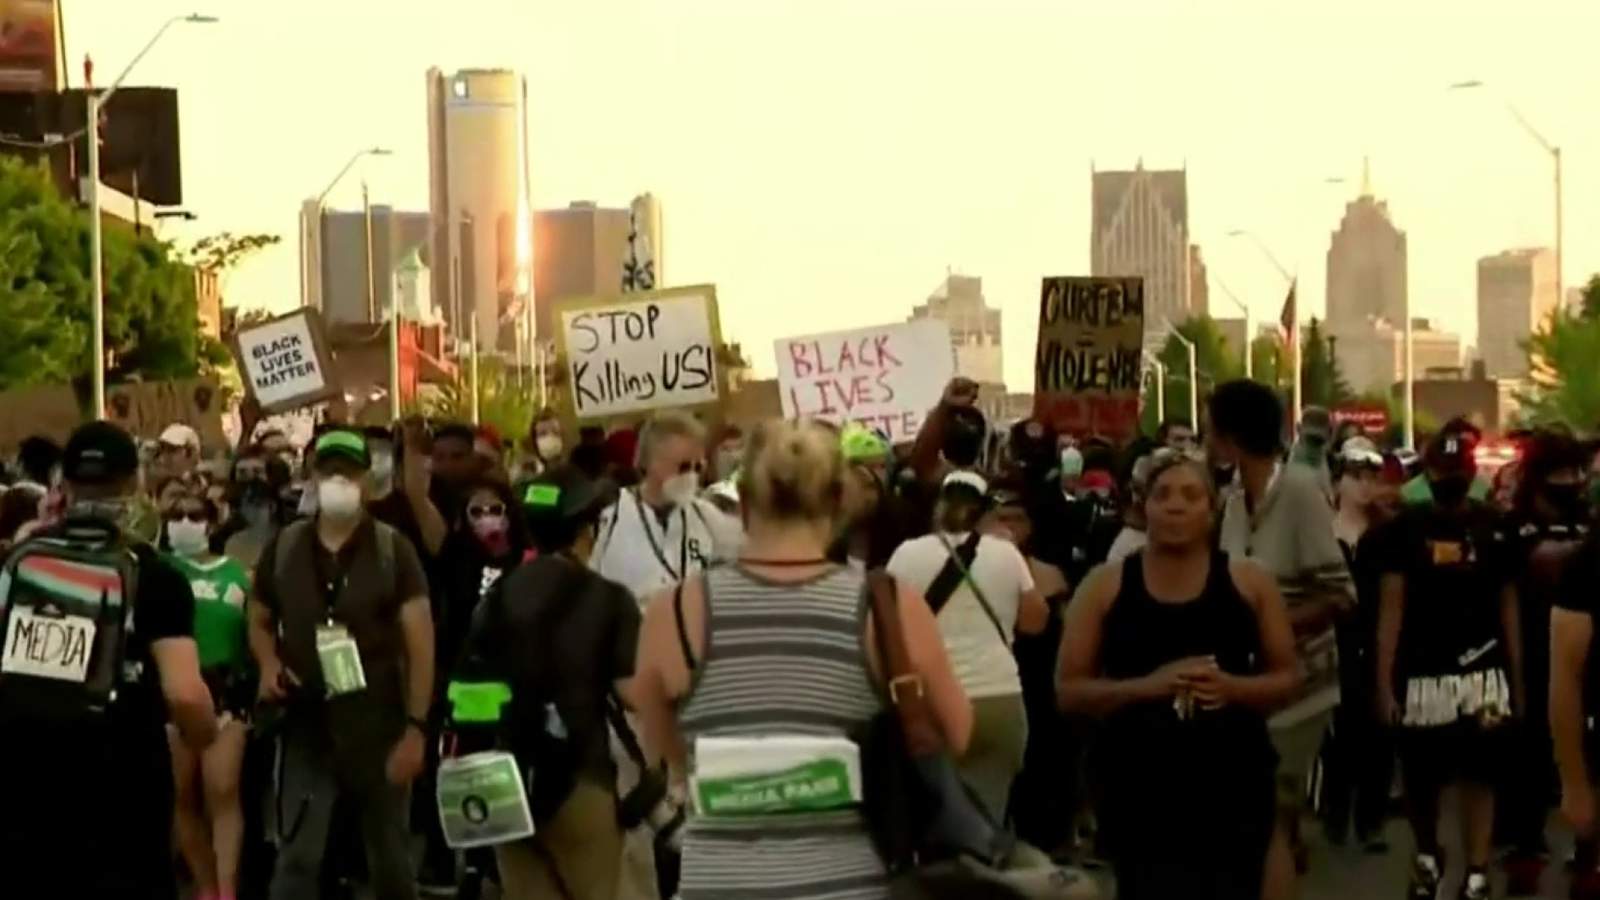 Members of Congress demand answers after border patrol flew drones over Detroit protests